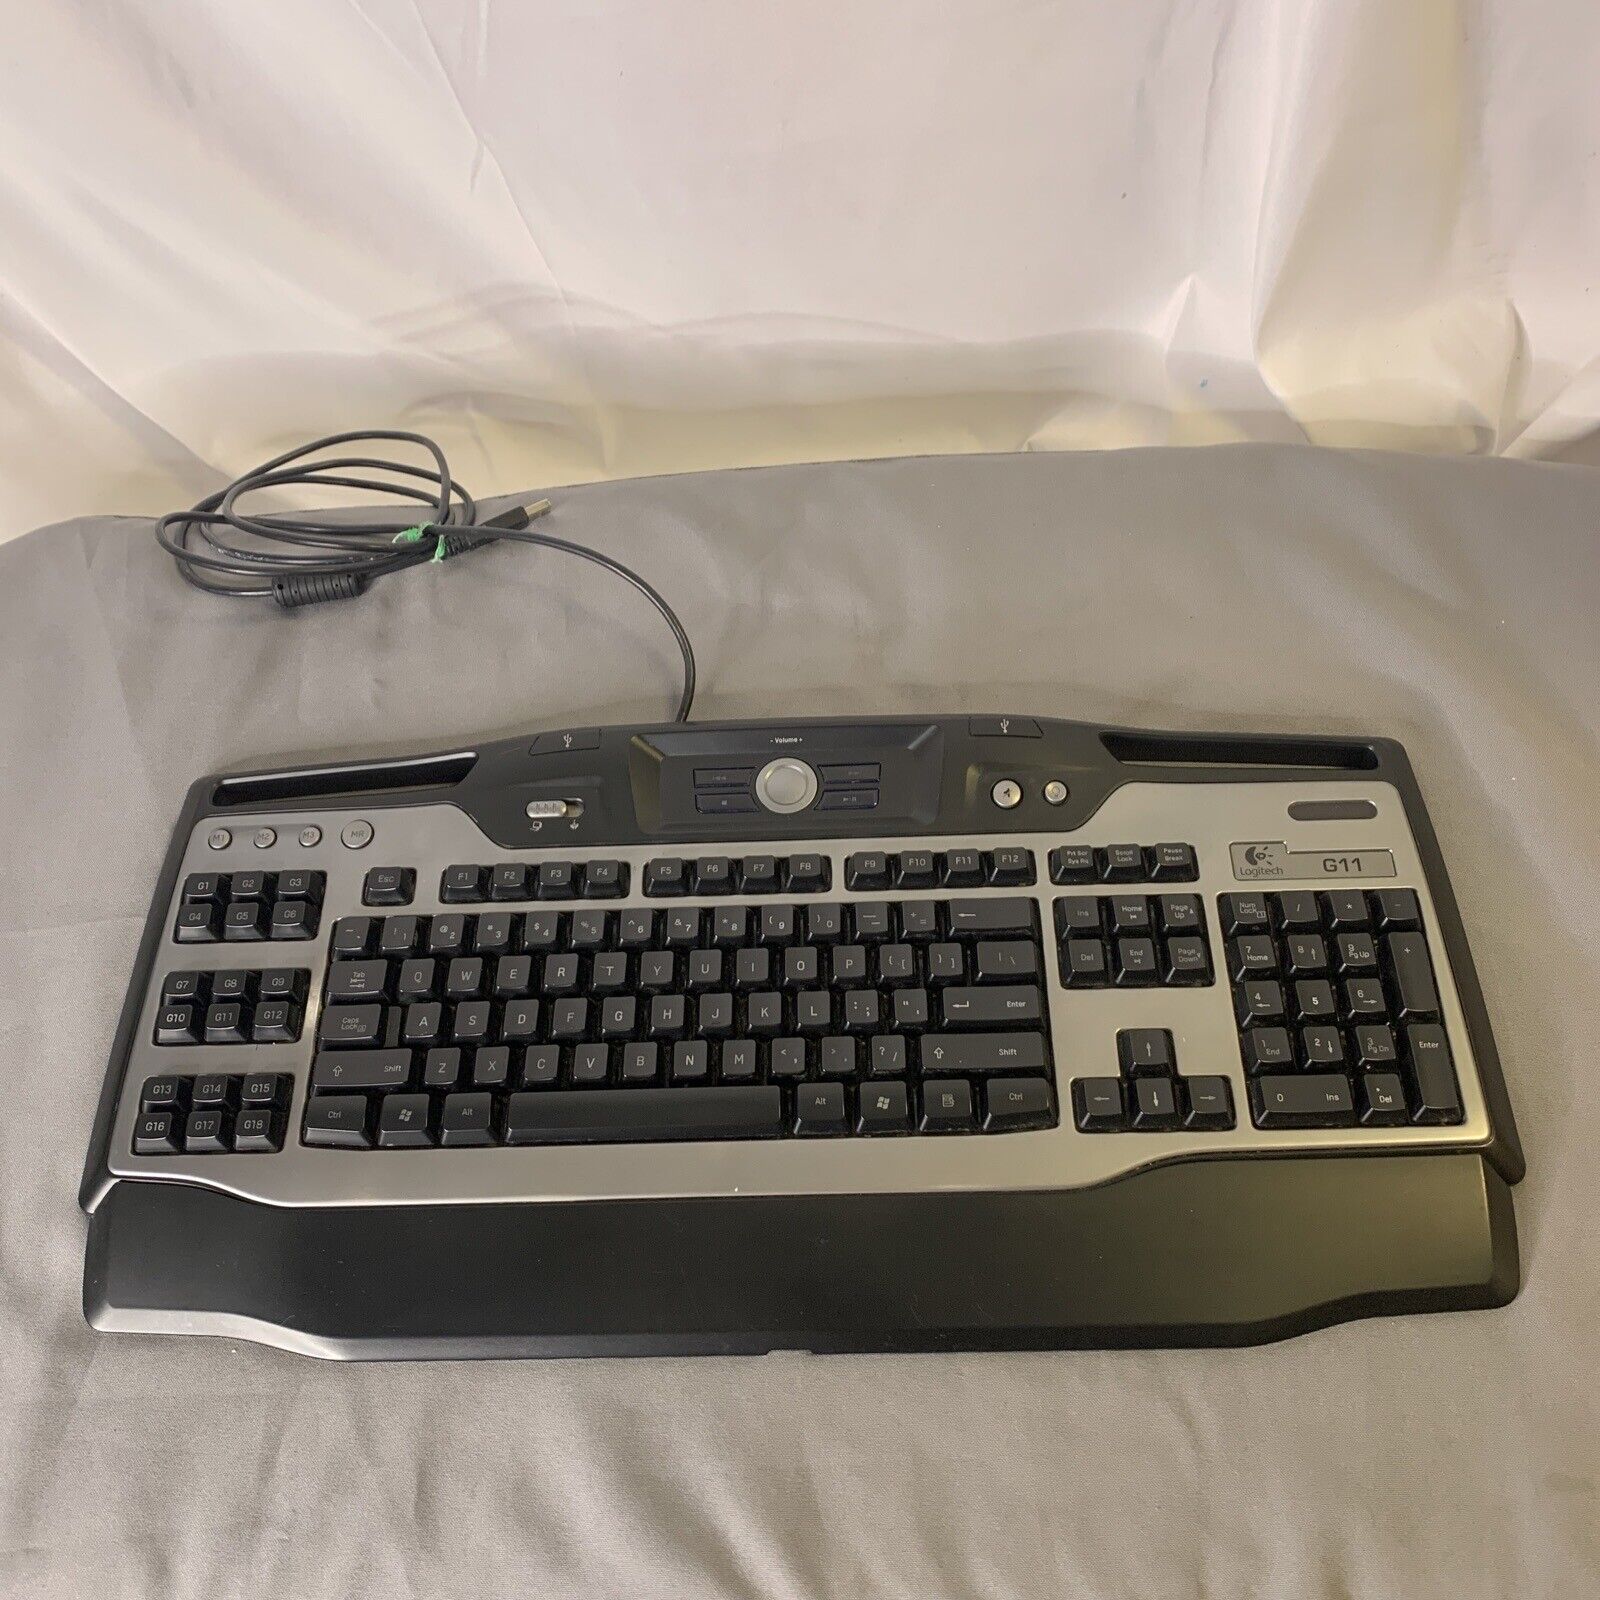 LOGITECH G11 WIRED GAMING COMPUTER KEYBOARD Y-UG75A